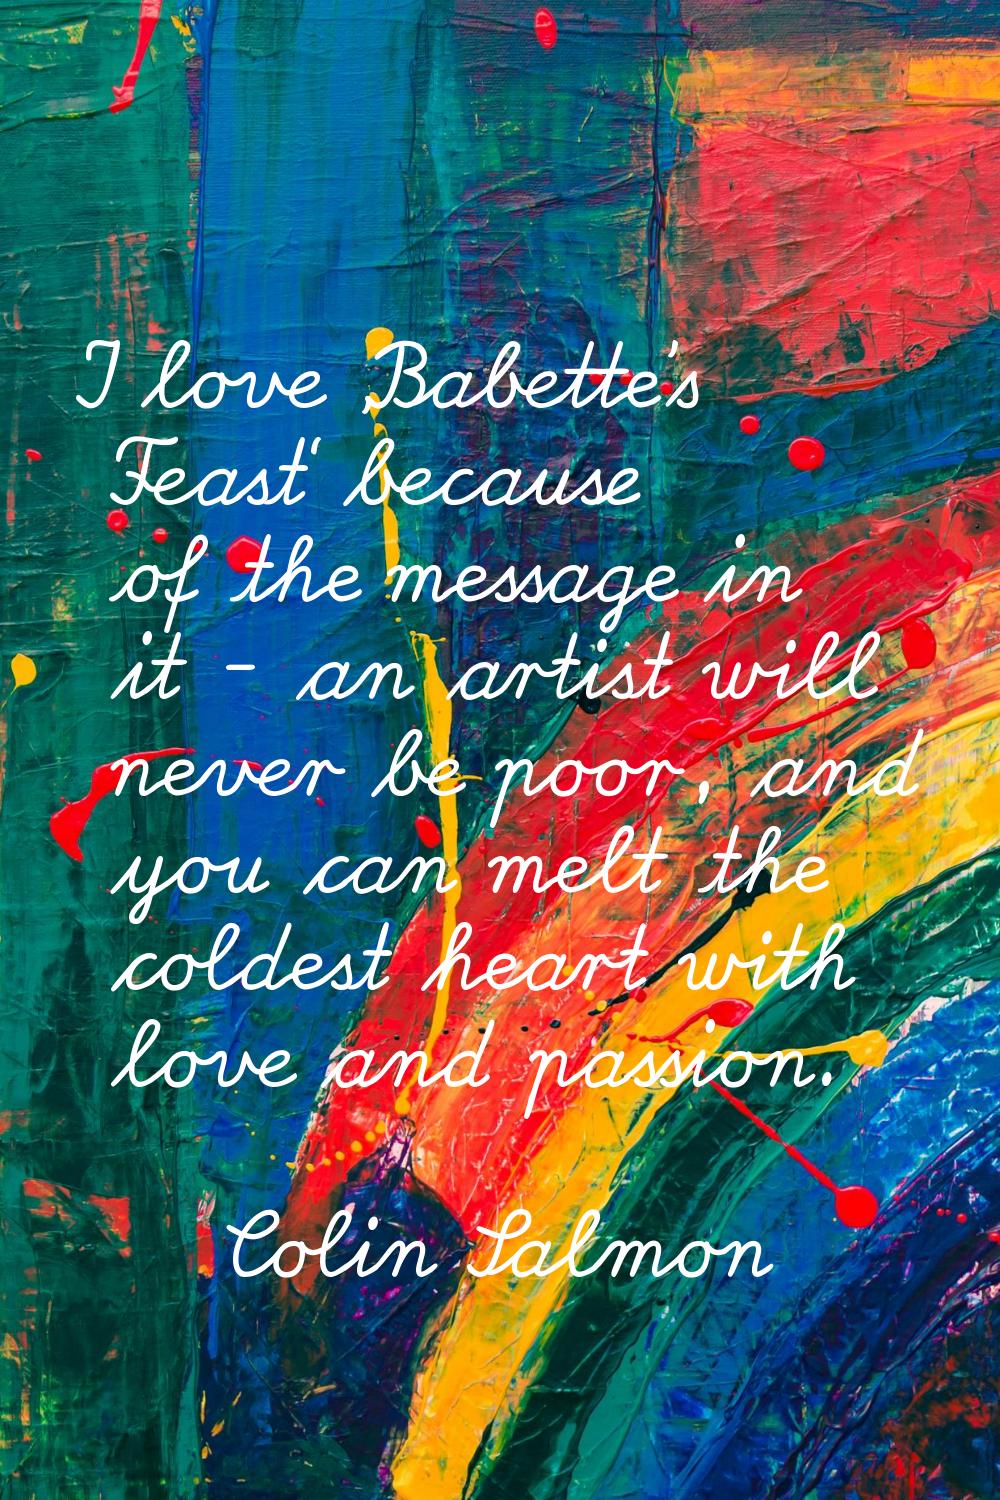 I love 'Babette's Feast' because of the message in it - an artist will never be poor, and you can m